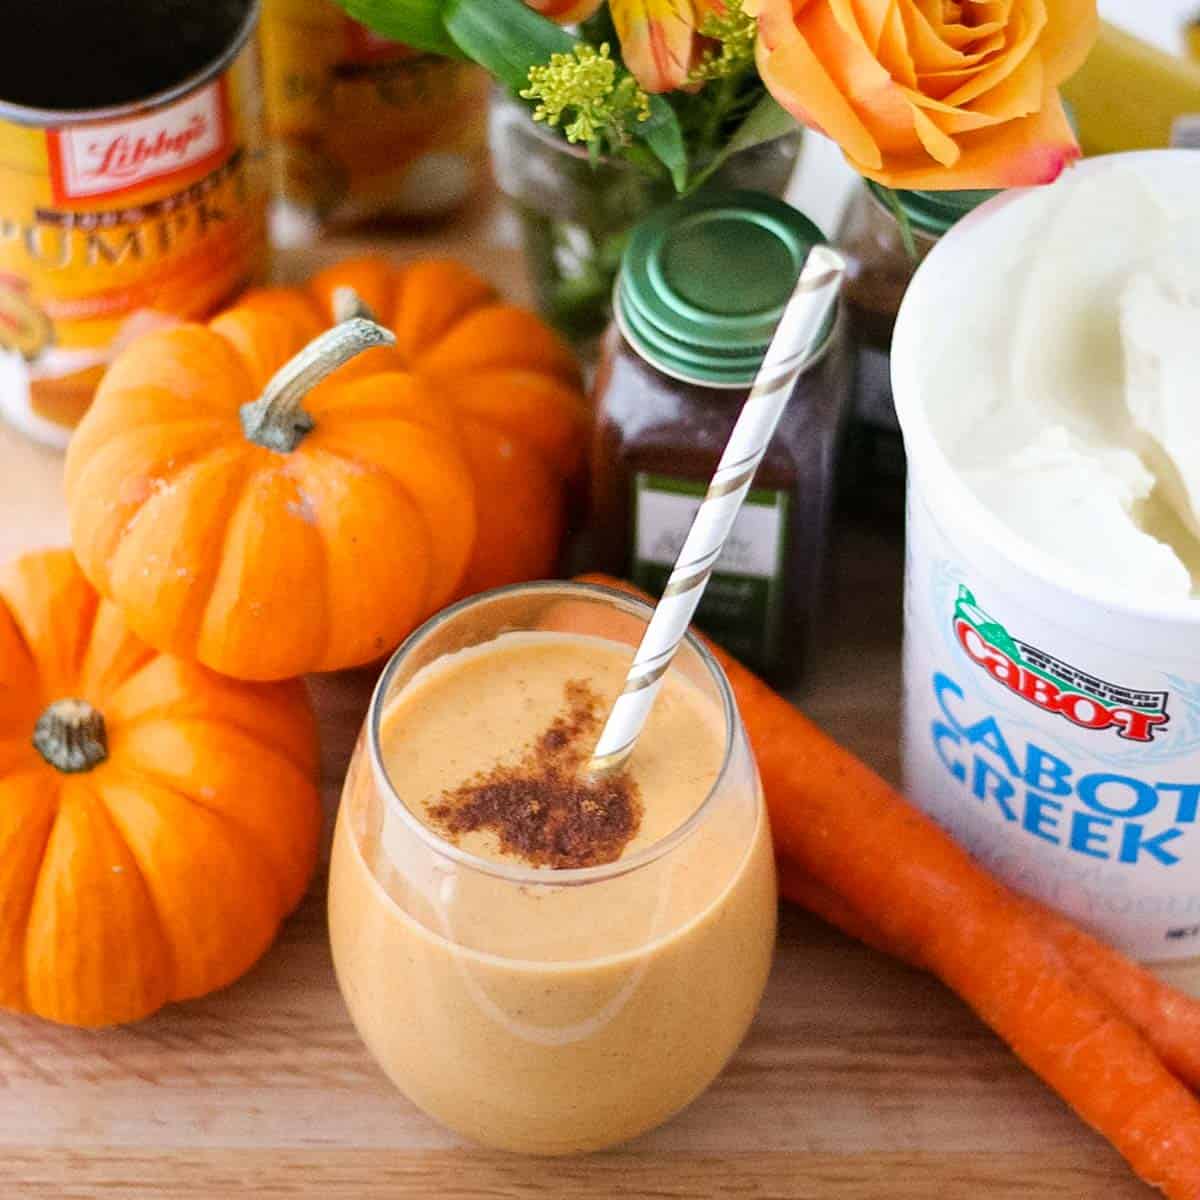 white and gold paper straw in a glass of pumpkin smoothie sprinkled with cinnamon, next two small pumpkins, carrots, container of yogurt, spices, and flowers